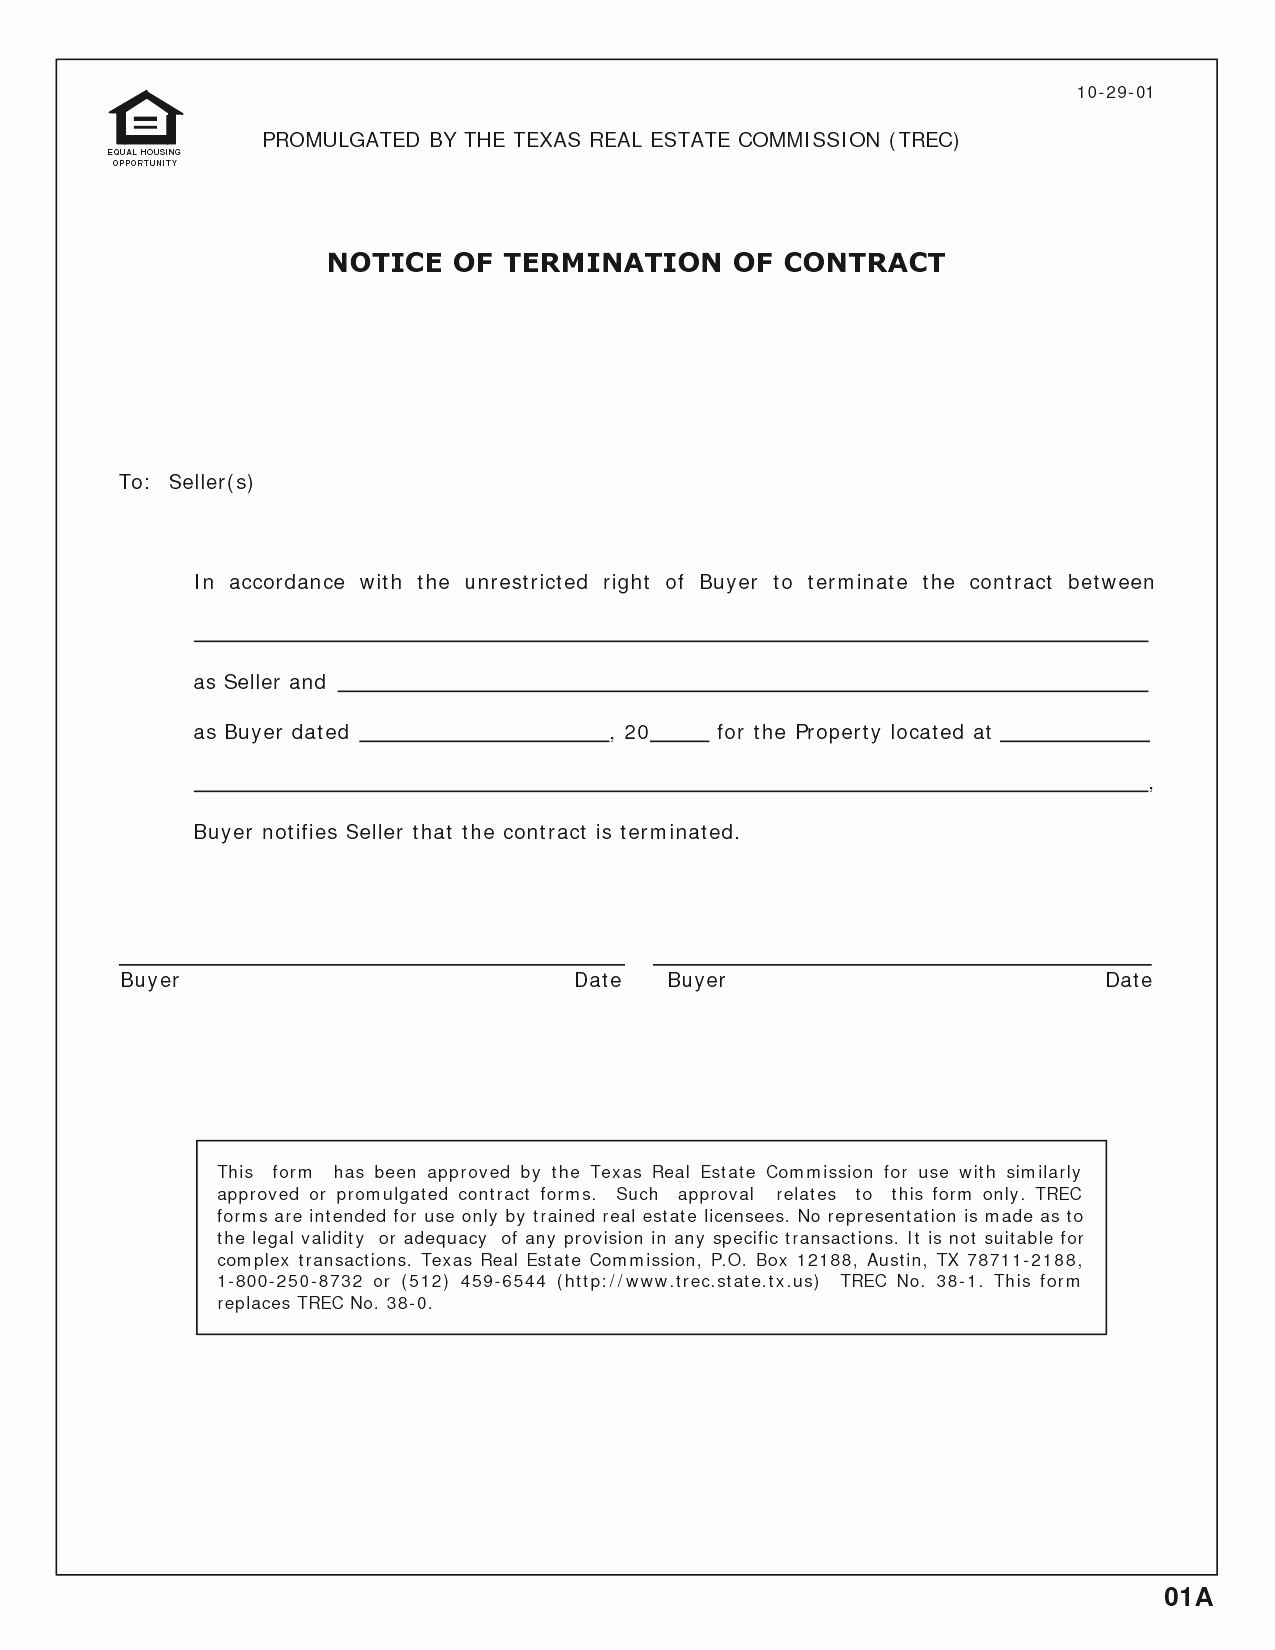 Termination Of Contract Template New Business Contract Termination Letter Template Mughals